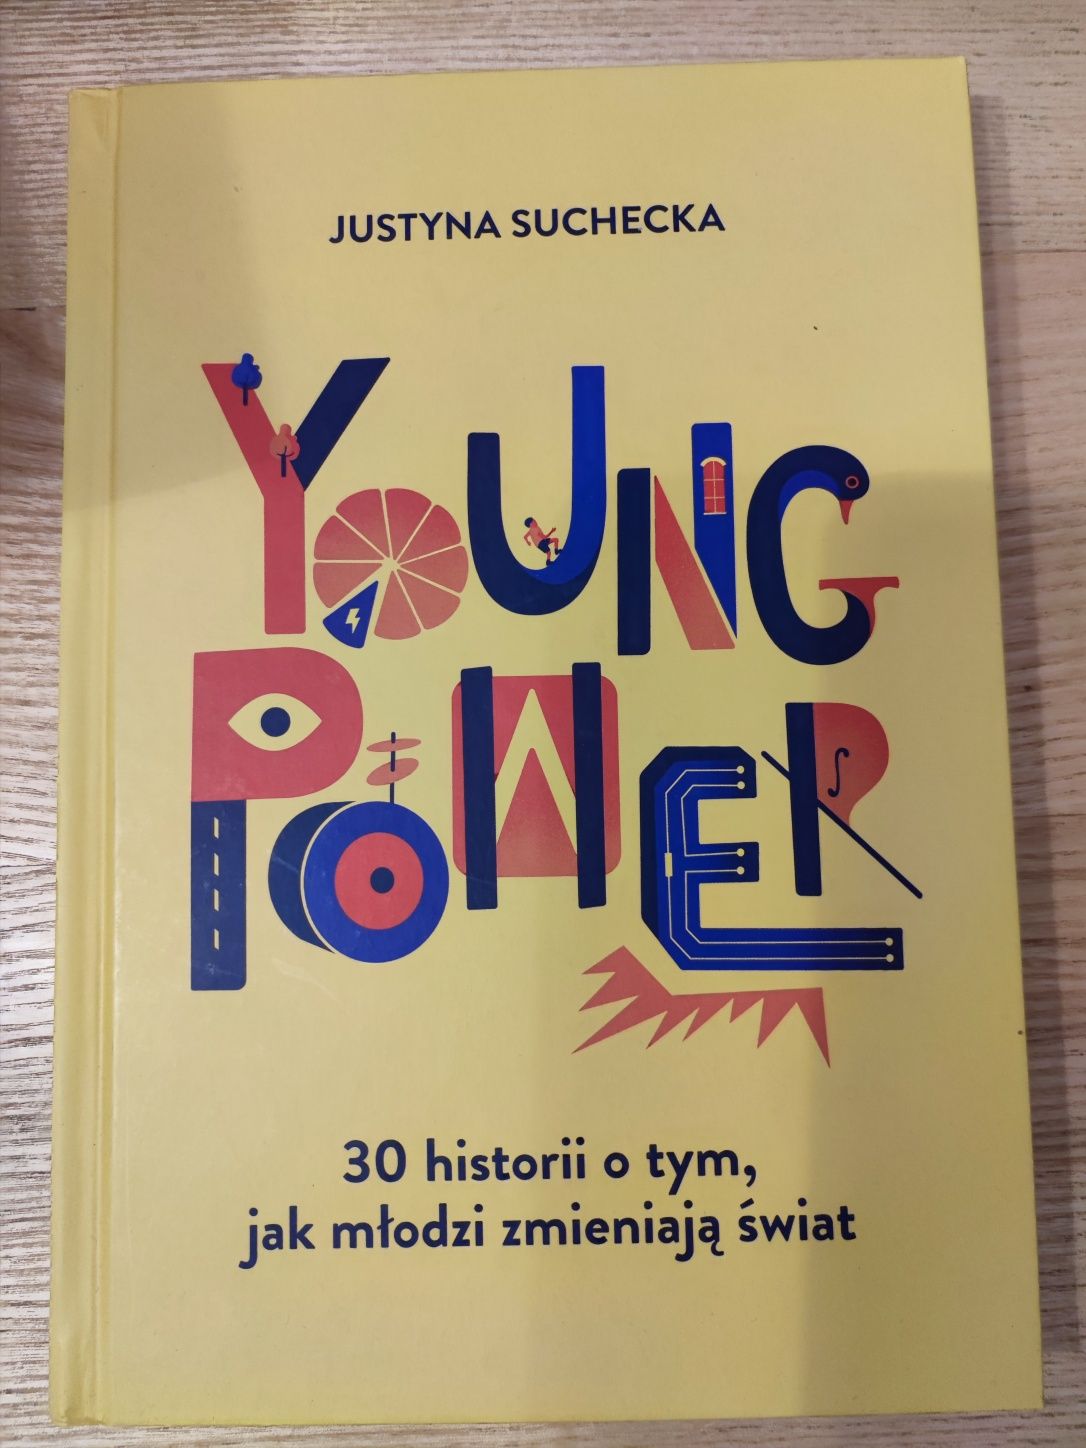 Young Power Justyna Suchecka